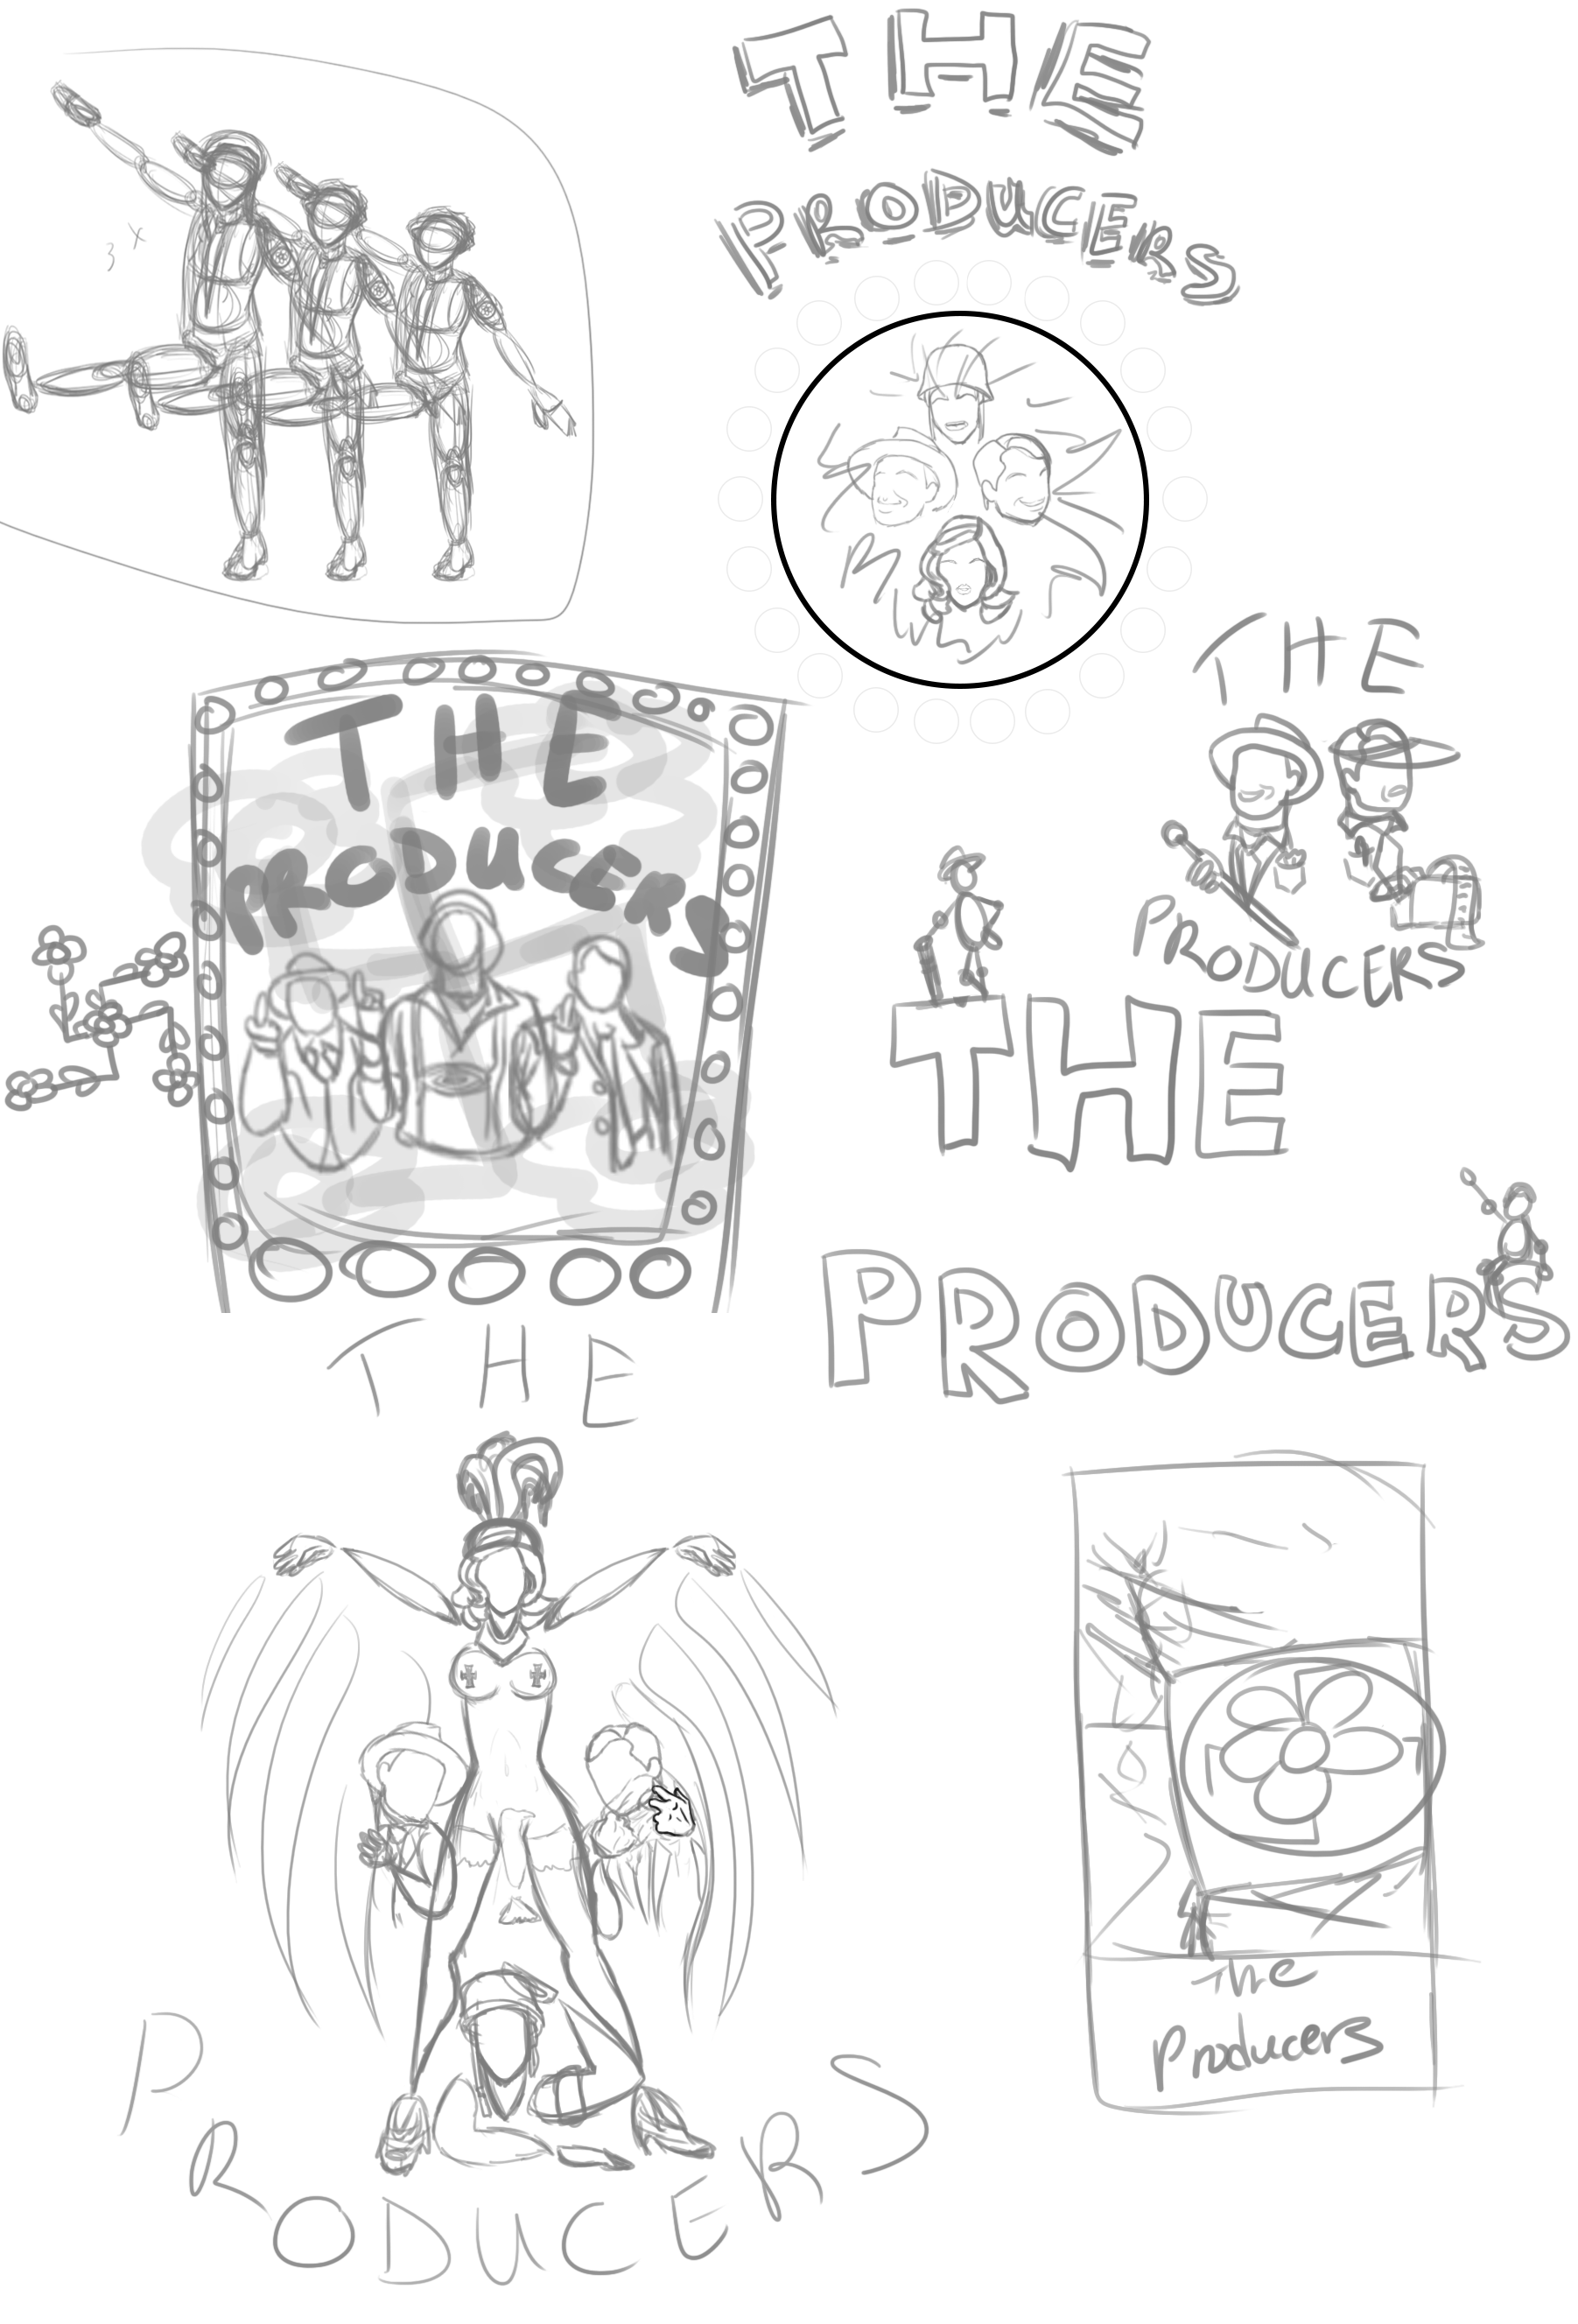 The Producers poster project - thumbnail sketches